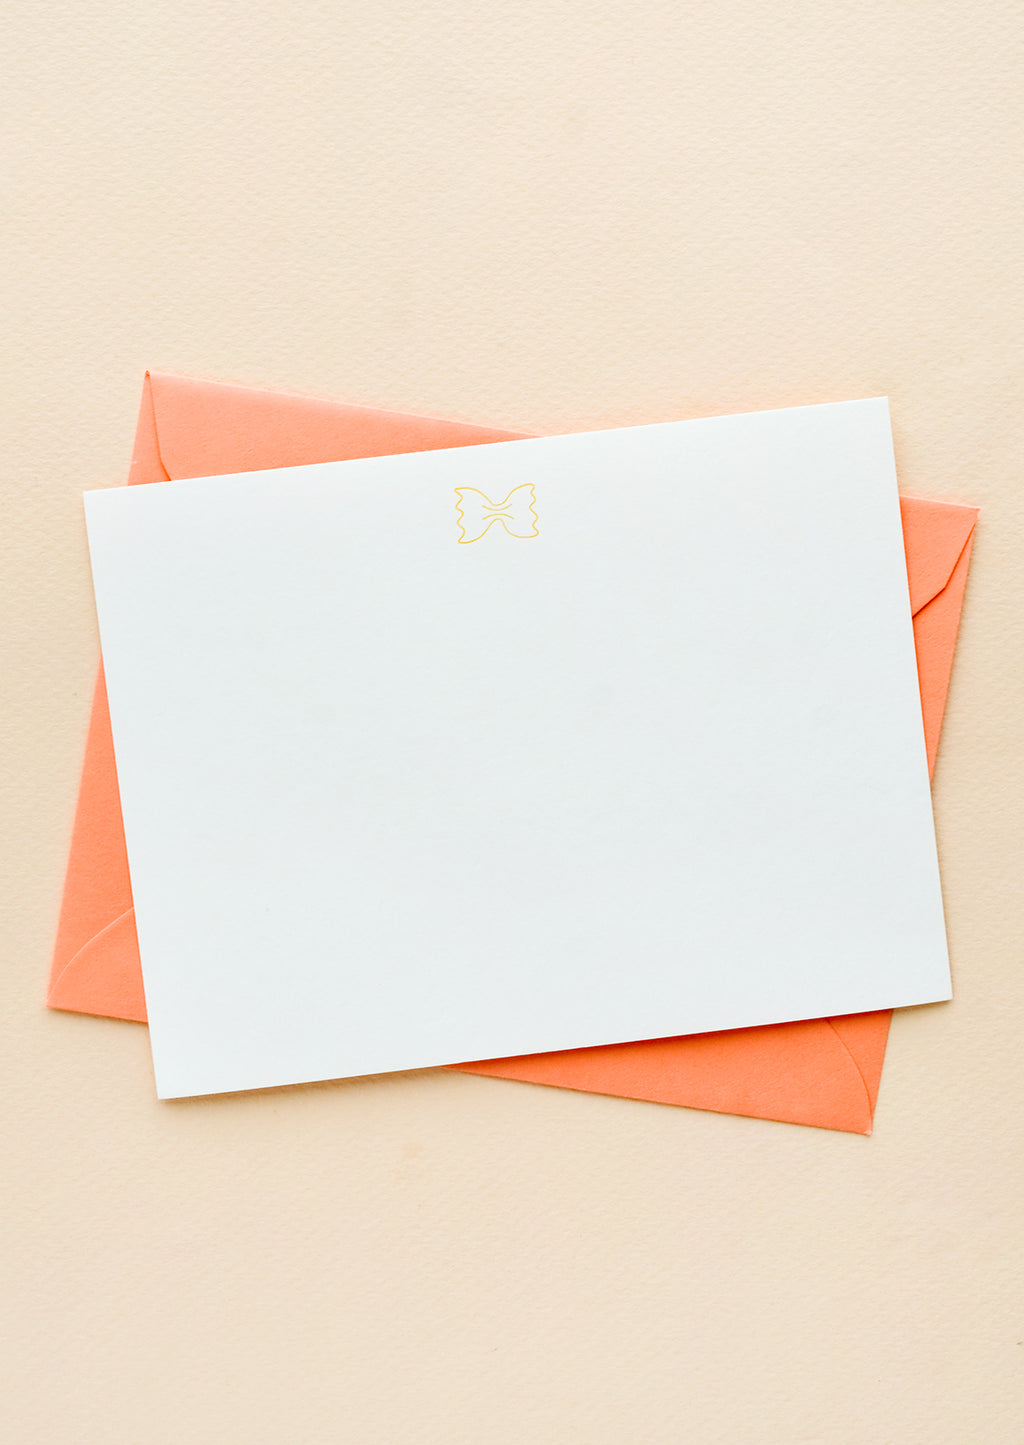 Bowtie Pasta: A coral colored envelope with white notecard and small icon of a piece of bowtie pasta printed at top.